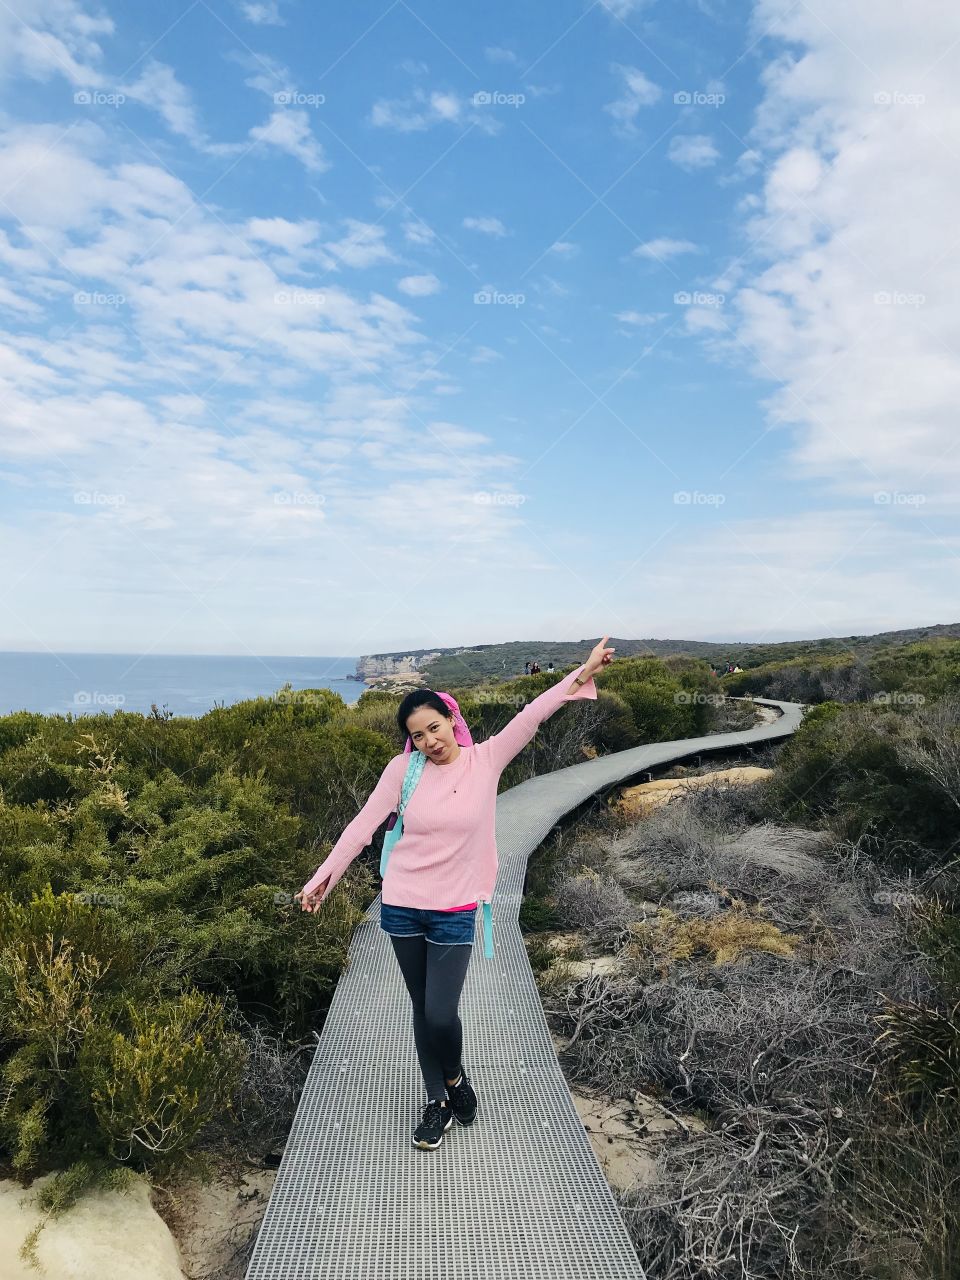 National Parks Walk- It’s no surprise that the Royal National Park has lots of different walking tracks on offer, some very short, others much more challenging.